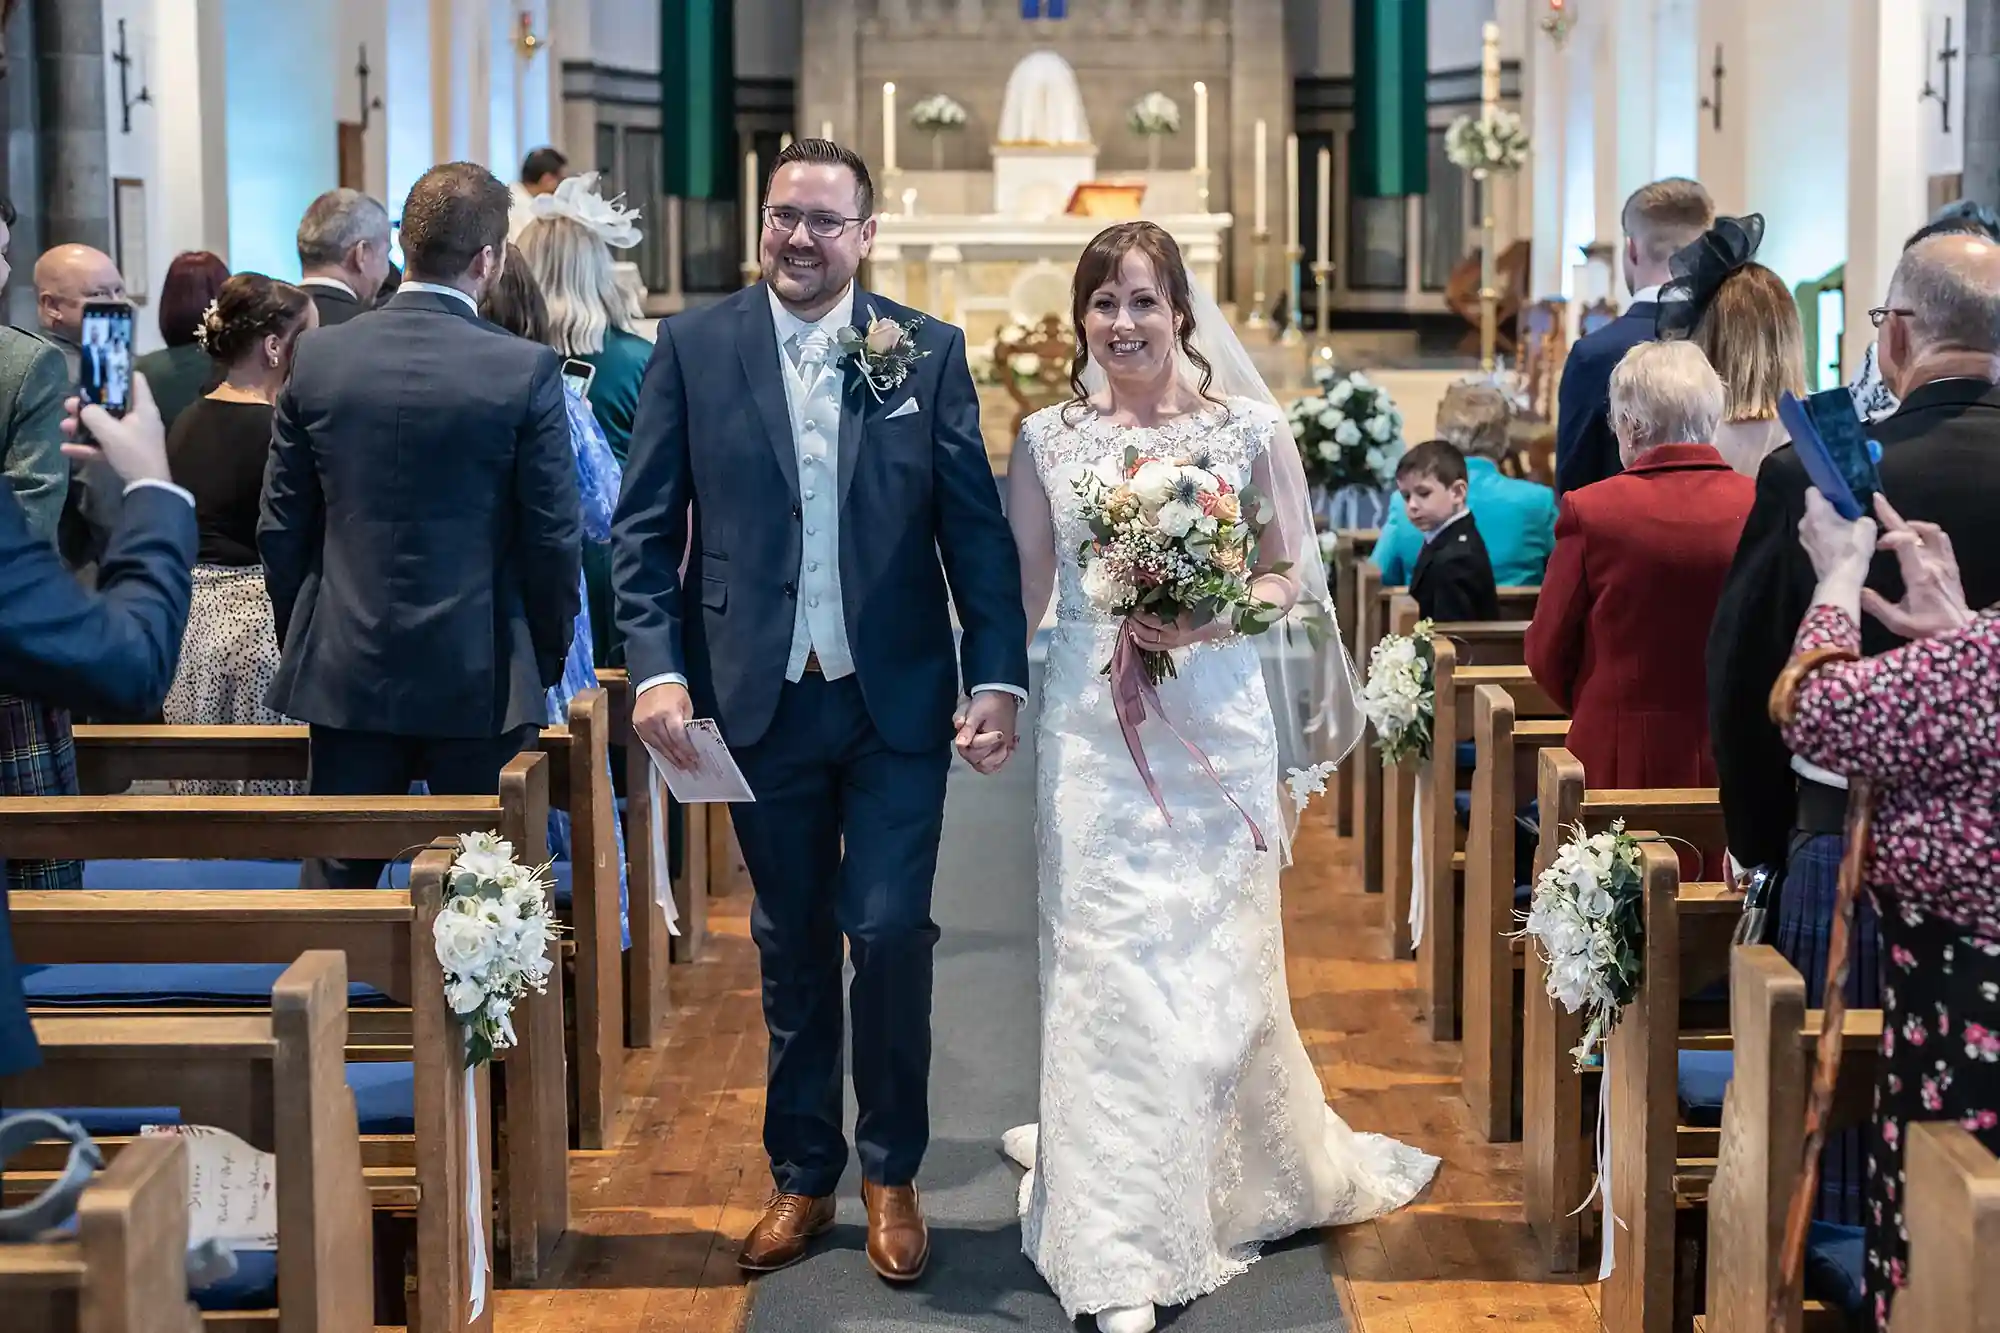 A bride and groom walk down the aisle of a church, smiling, as guests capture the moment with their smartphones.